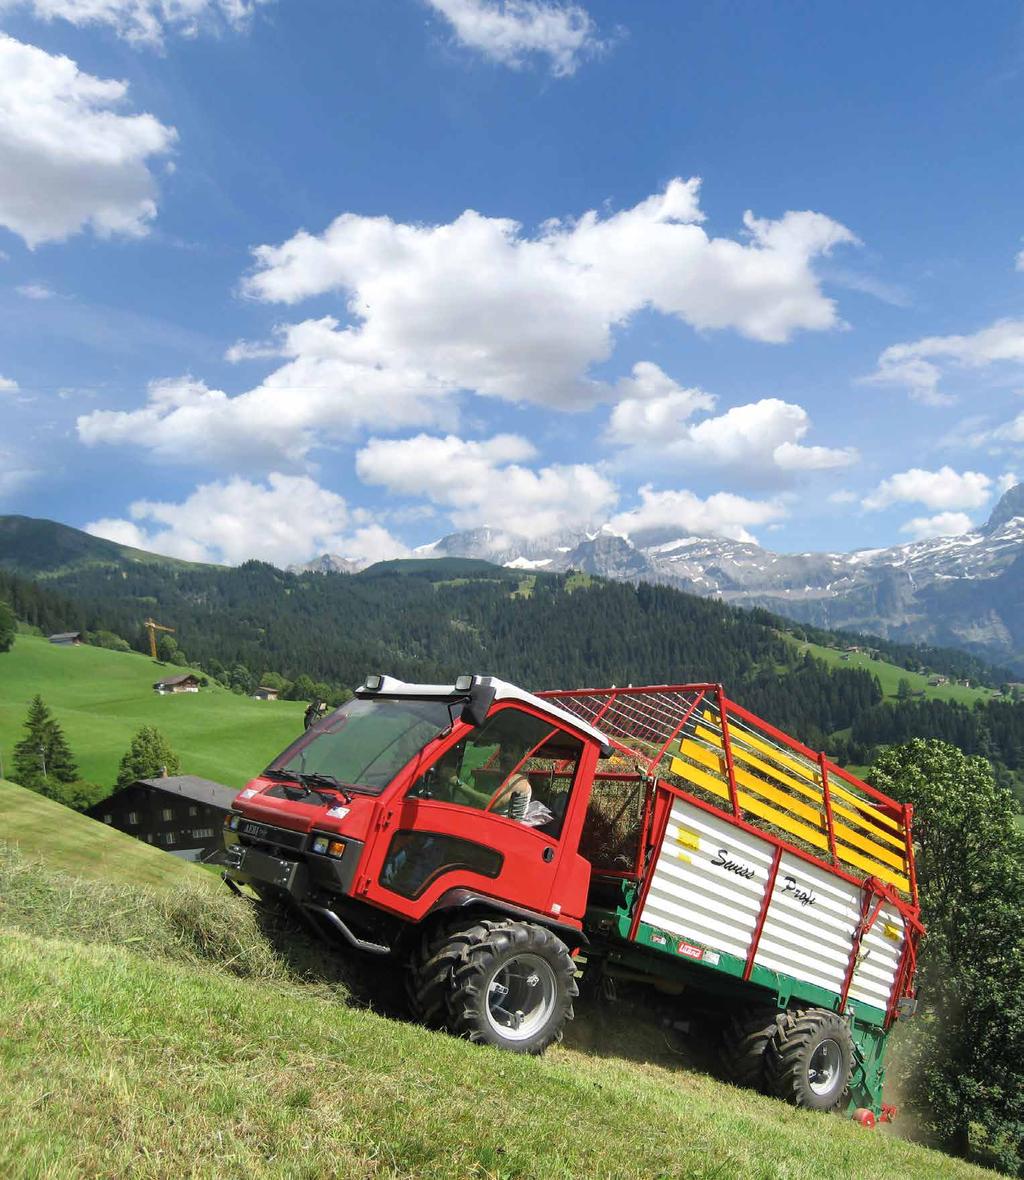 Accurate lading Fater unlading THE LEADING MANUFACTURER OF REAR LOADERS FOR THE ALPINE REGION! Lüönd ha earned a reputatin fr uncmprmiing quality ver the year.